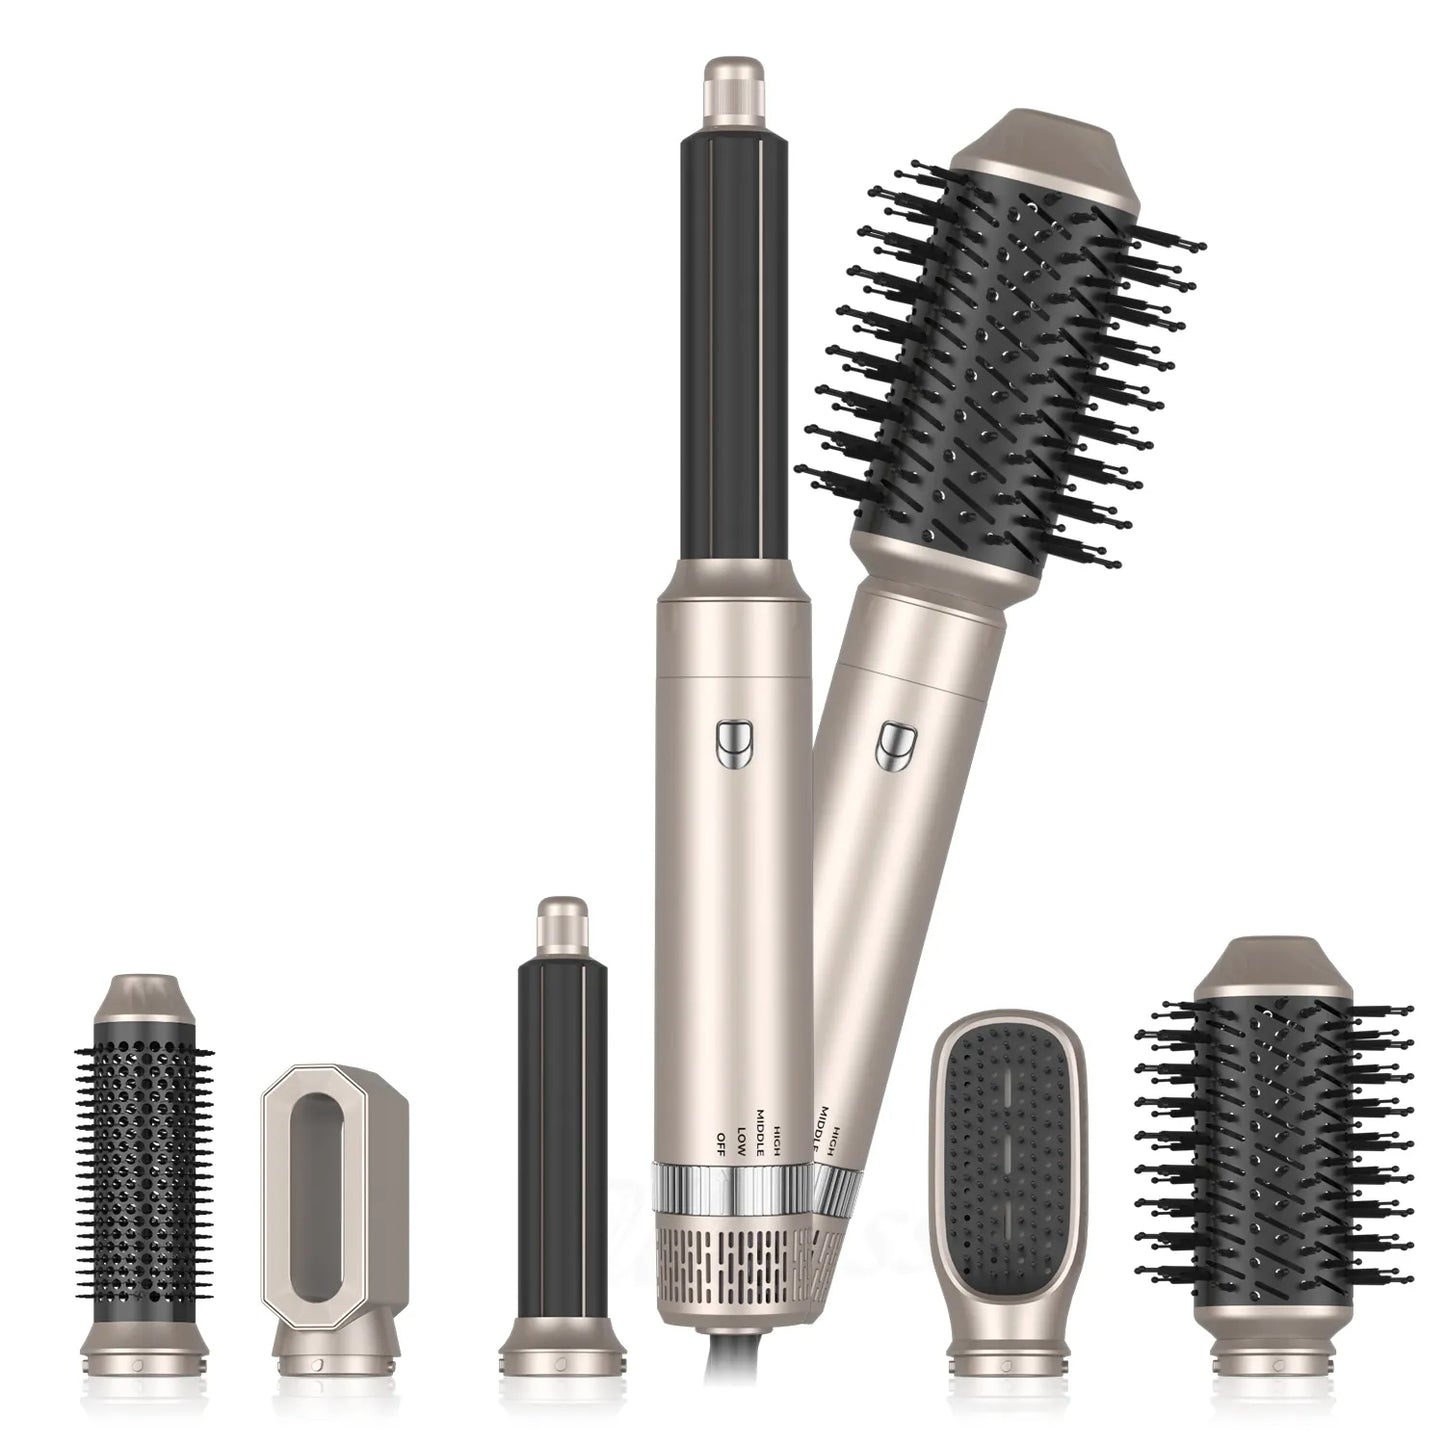 6 In 1 Hair Dryer Brush and Volumizer with Detachable Negative Ion